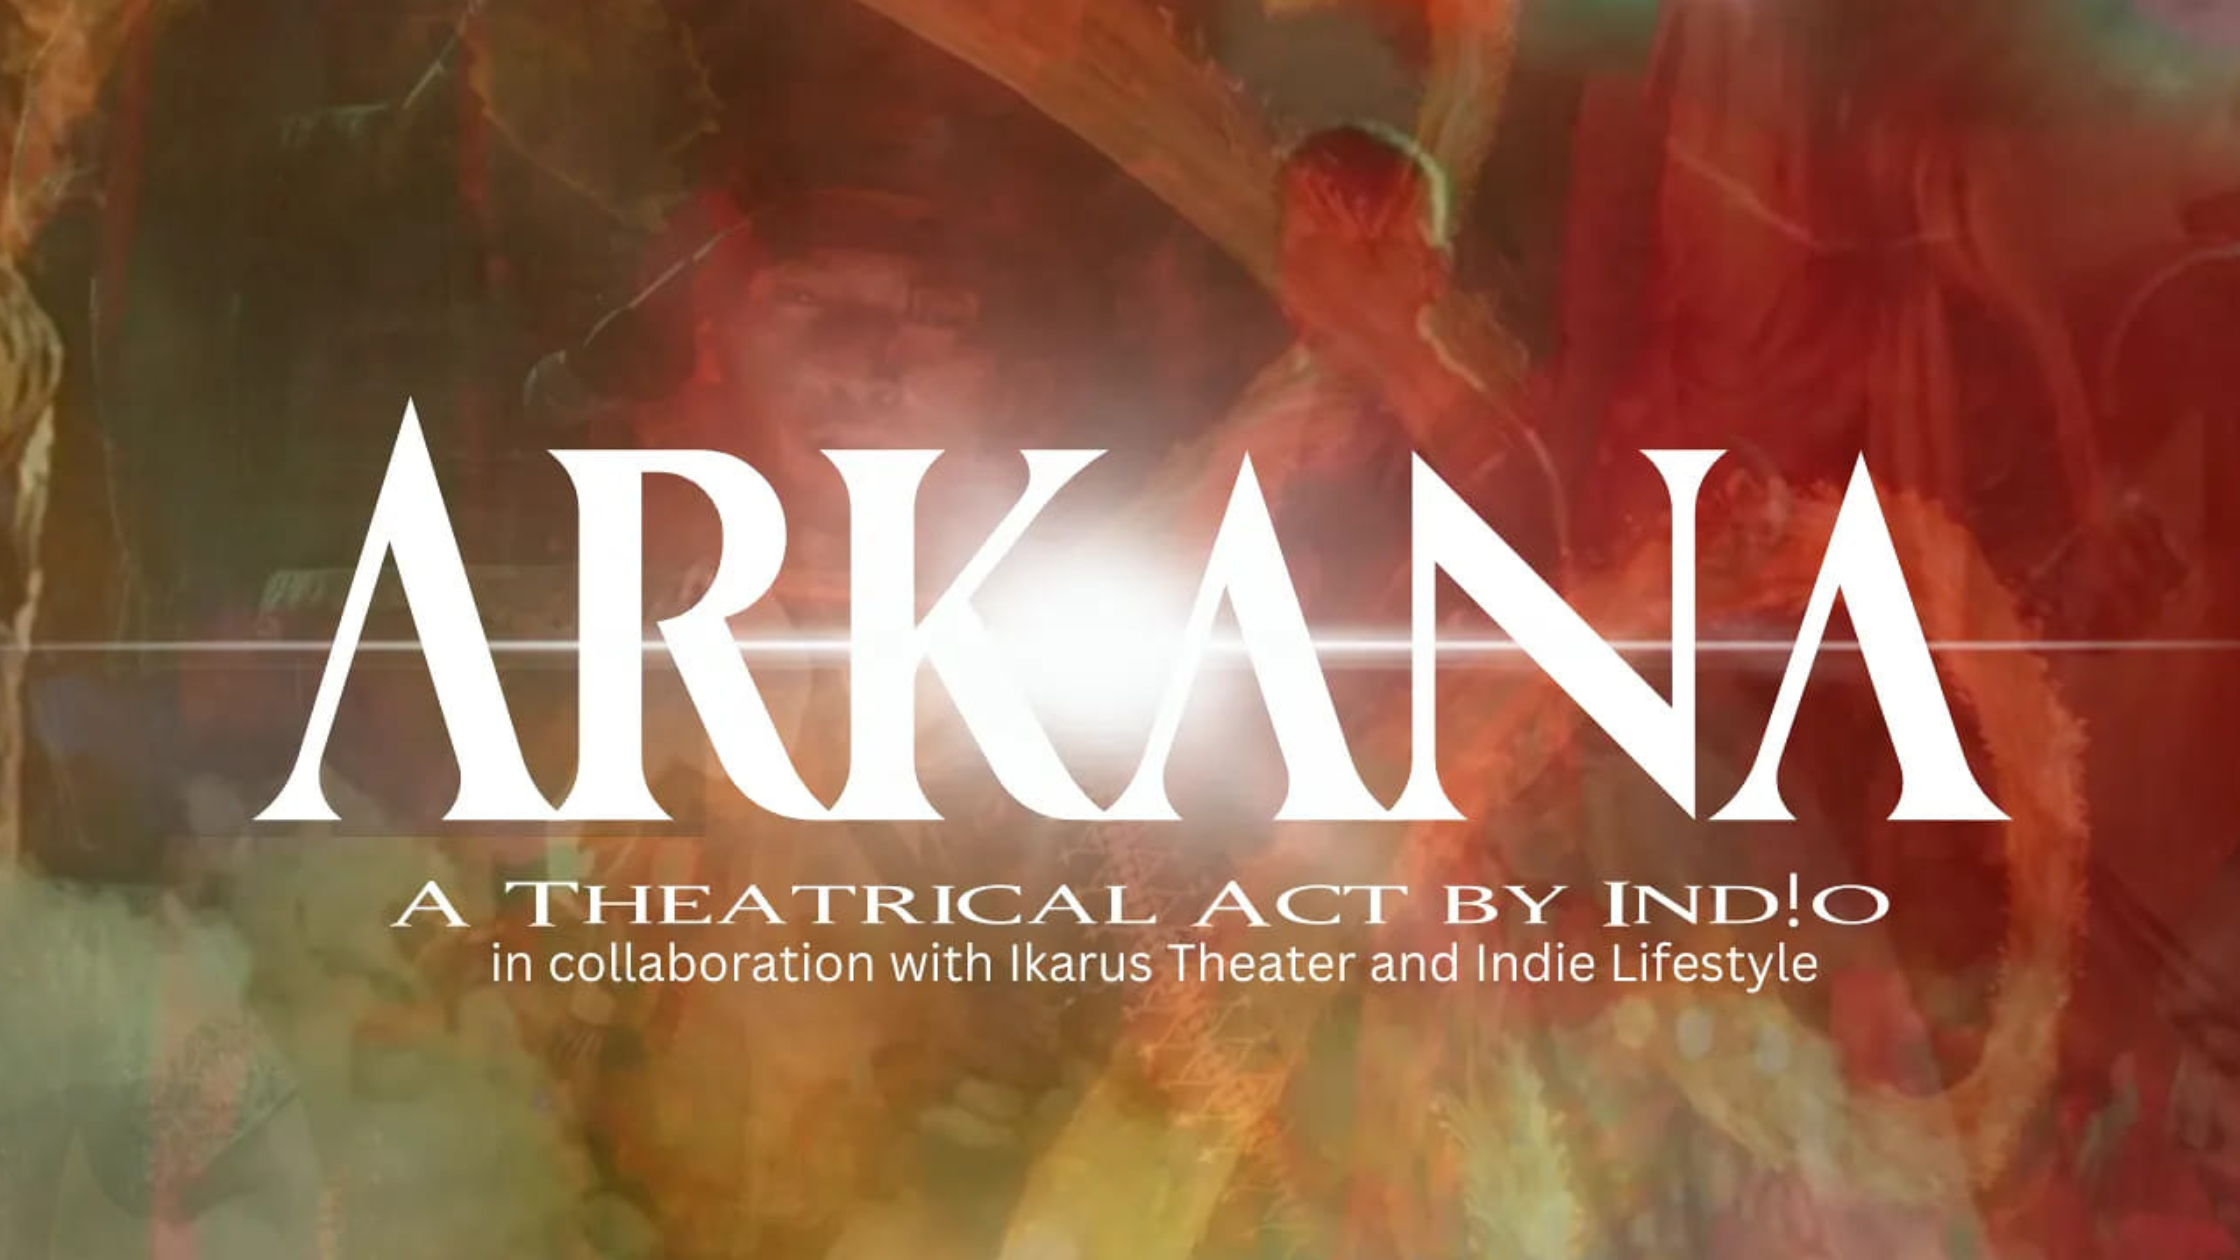 ‘Arkana’ Show to Be Staged This Month